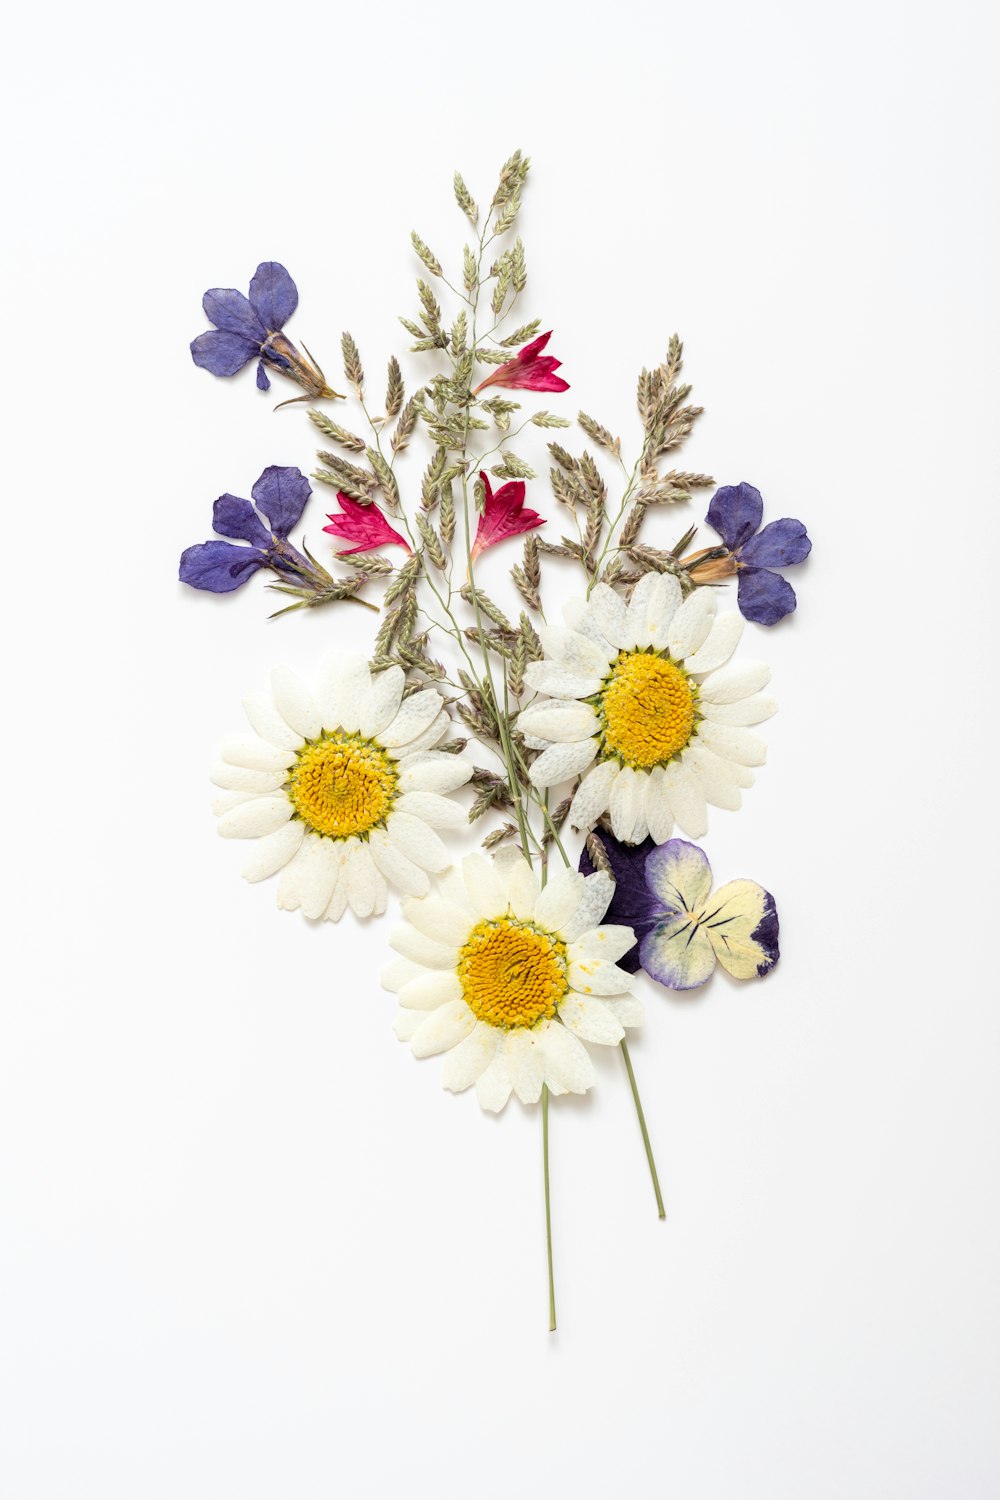 white and purple flowers on white background